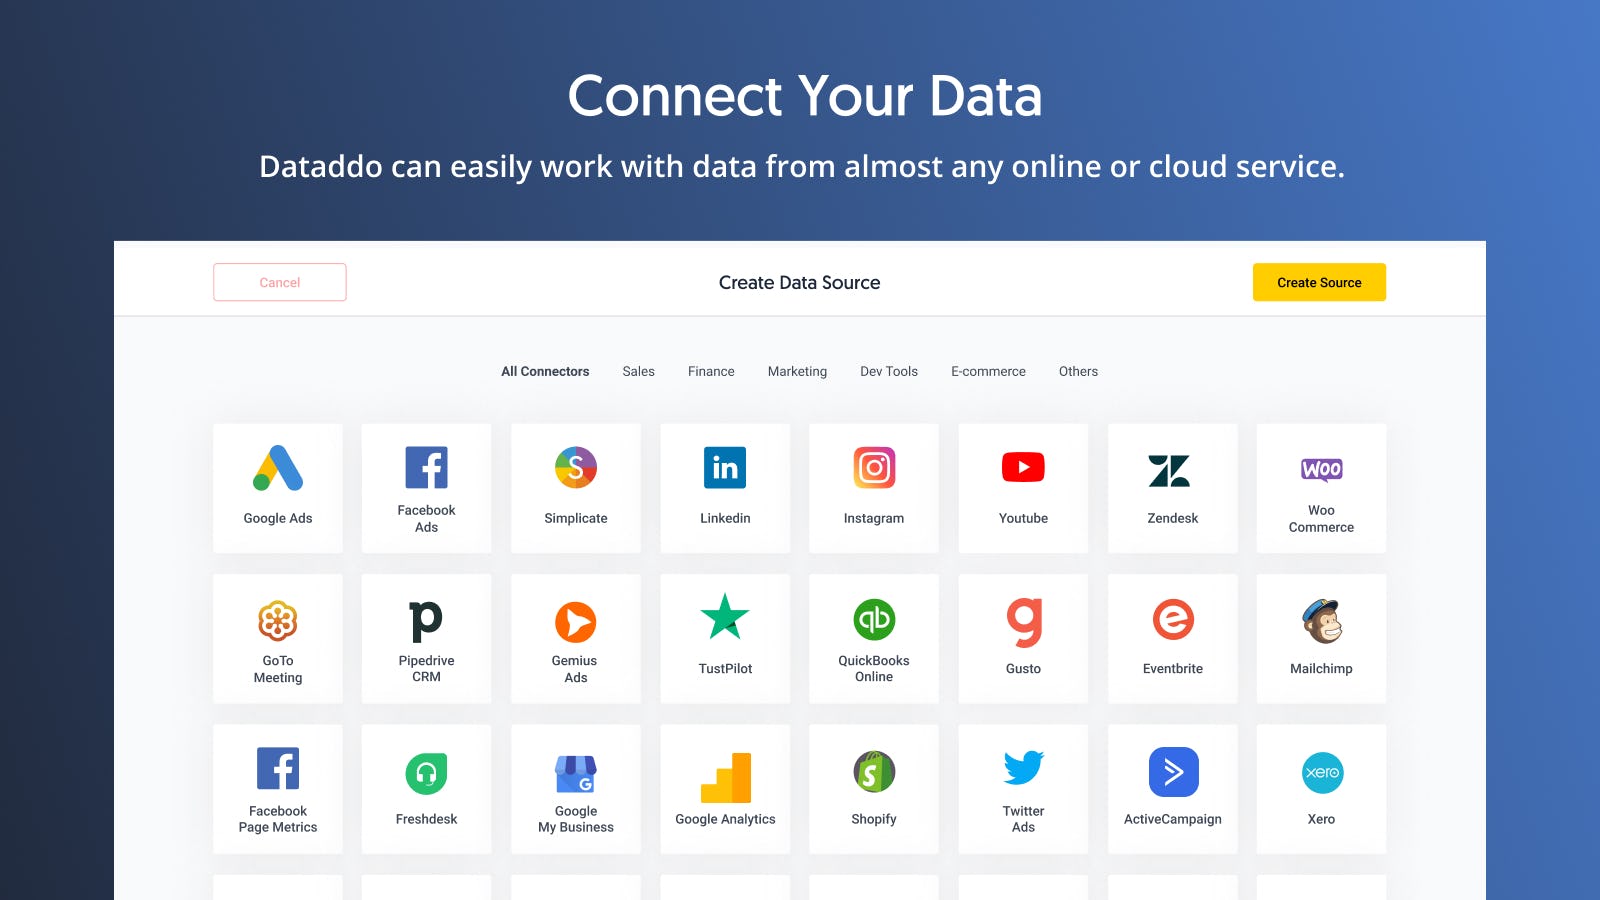 Dataddo Software - Dataddo can easily work with data from almost any online or cloud service, including Salesforce, HubSpot, Quickbooks, SurveyMonkey, Google Analytics, Facebook, and Atlassian Jira.